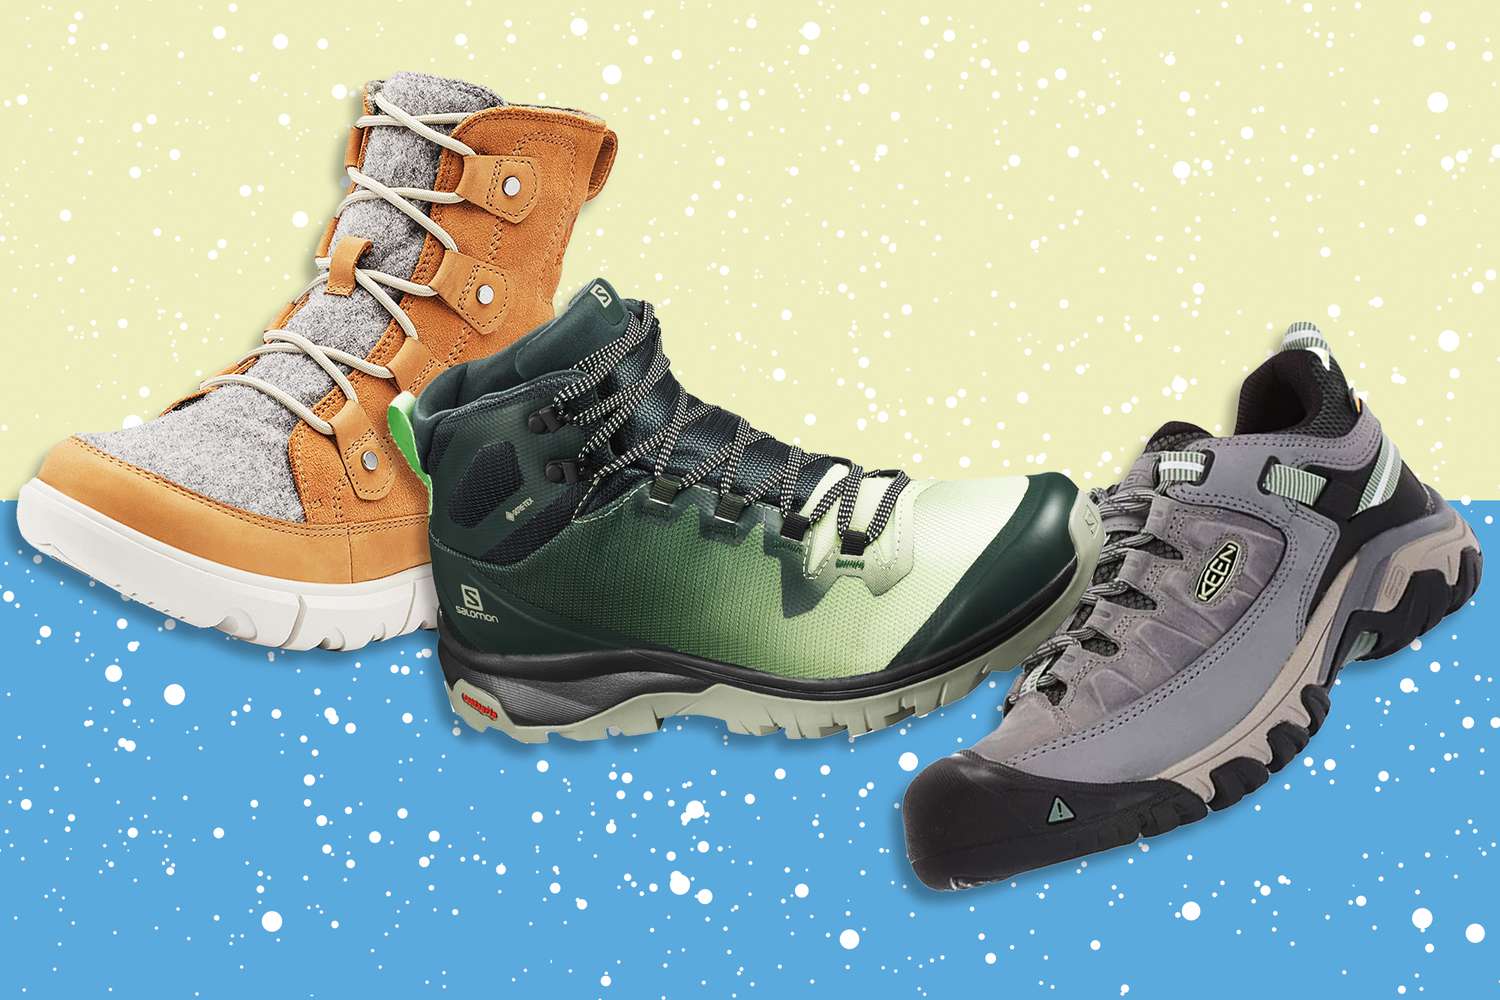 3 hiking boots on a designed background